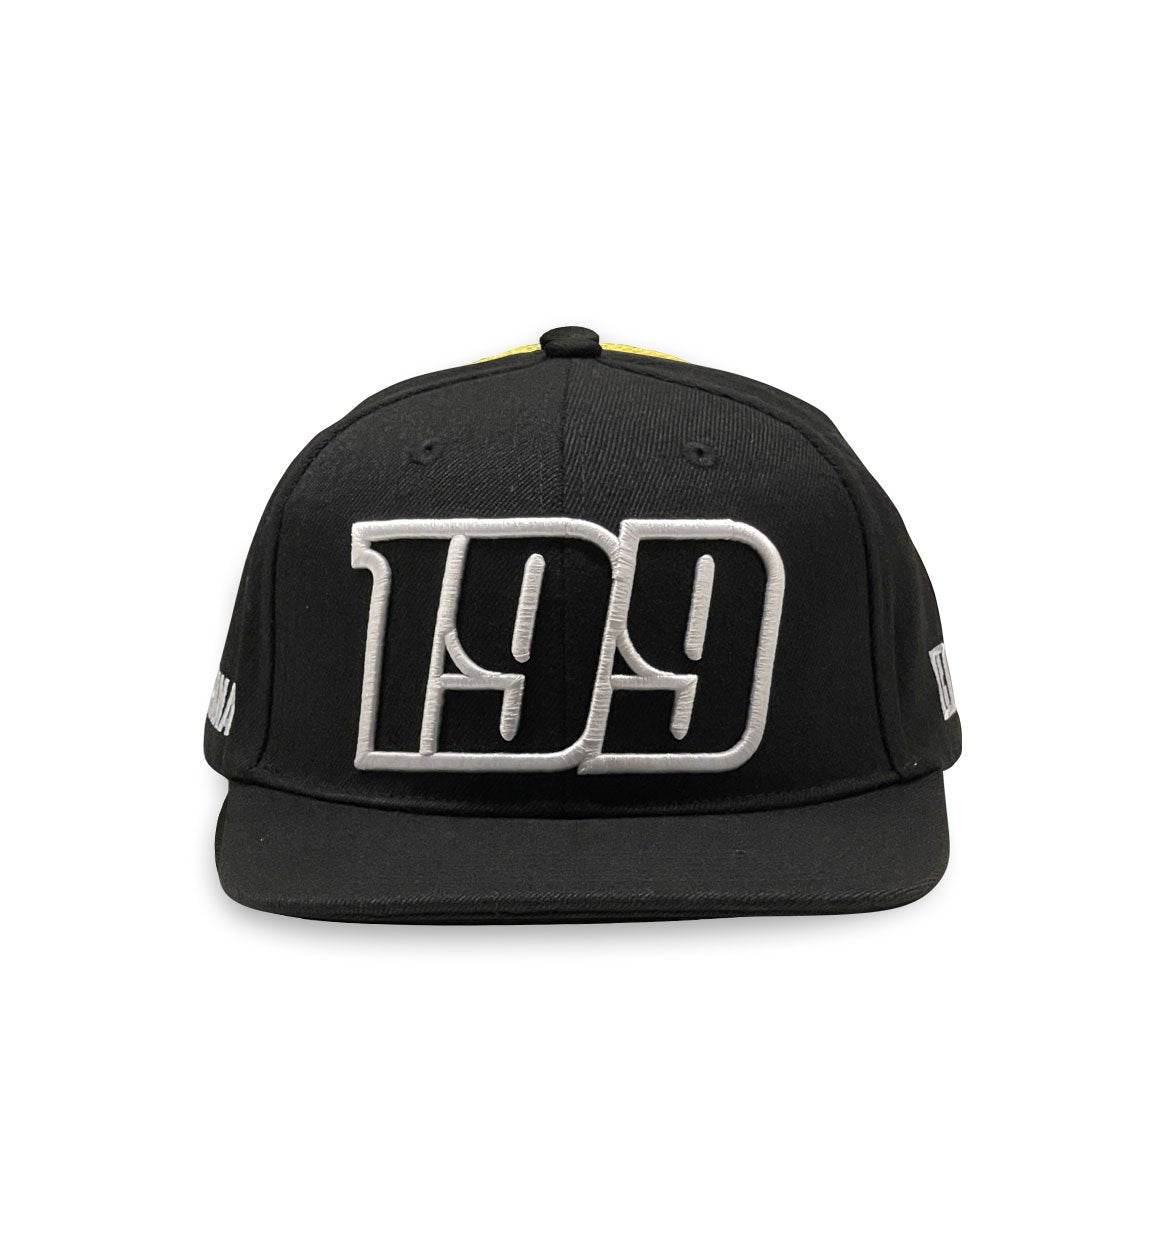 199 EMBROIDERED snapback